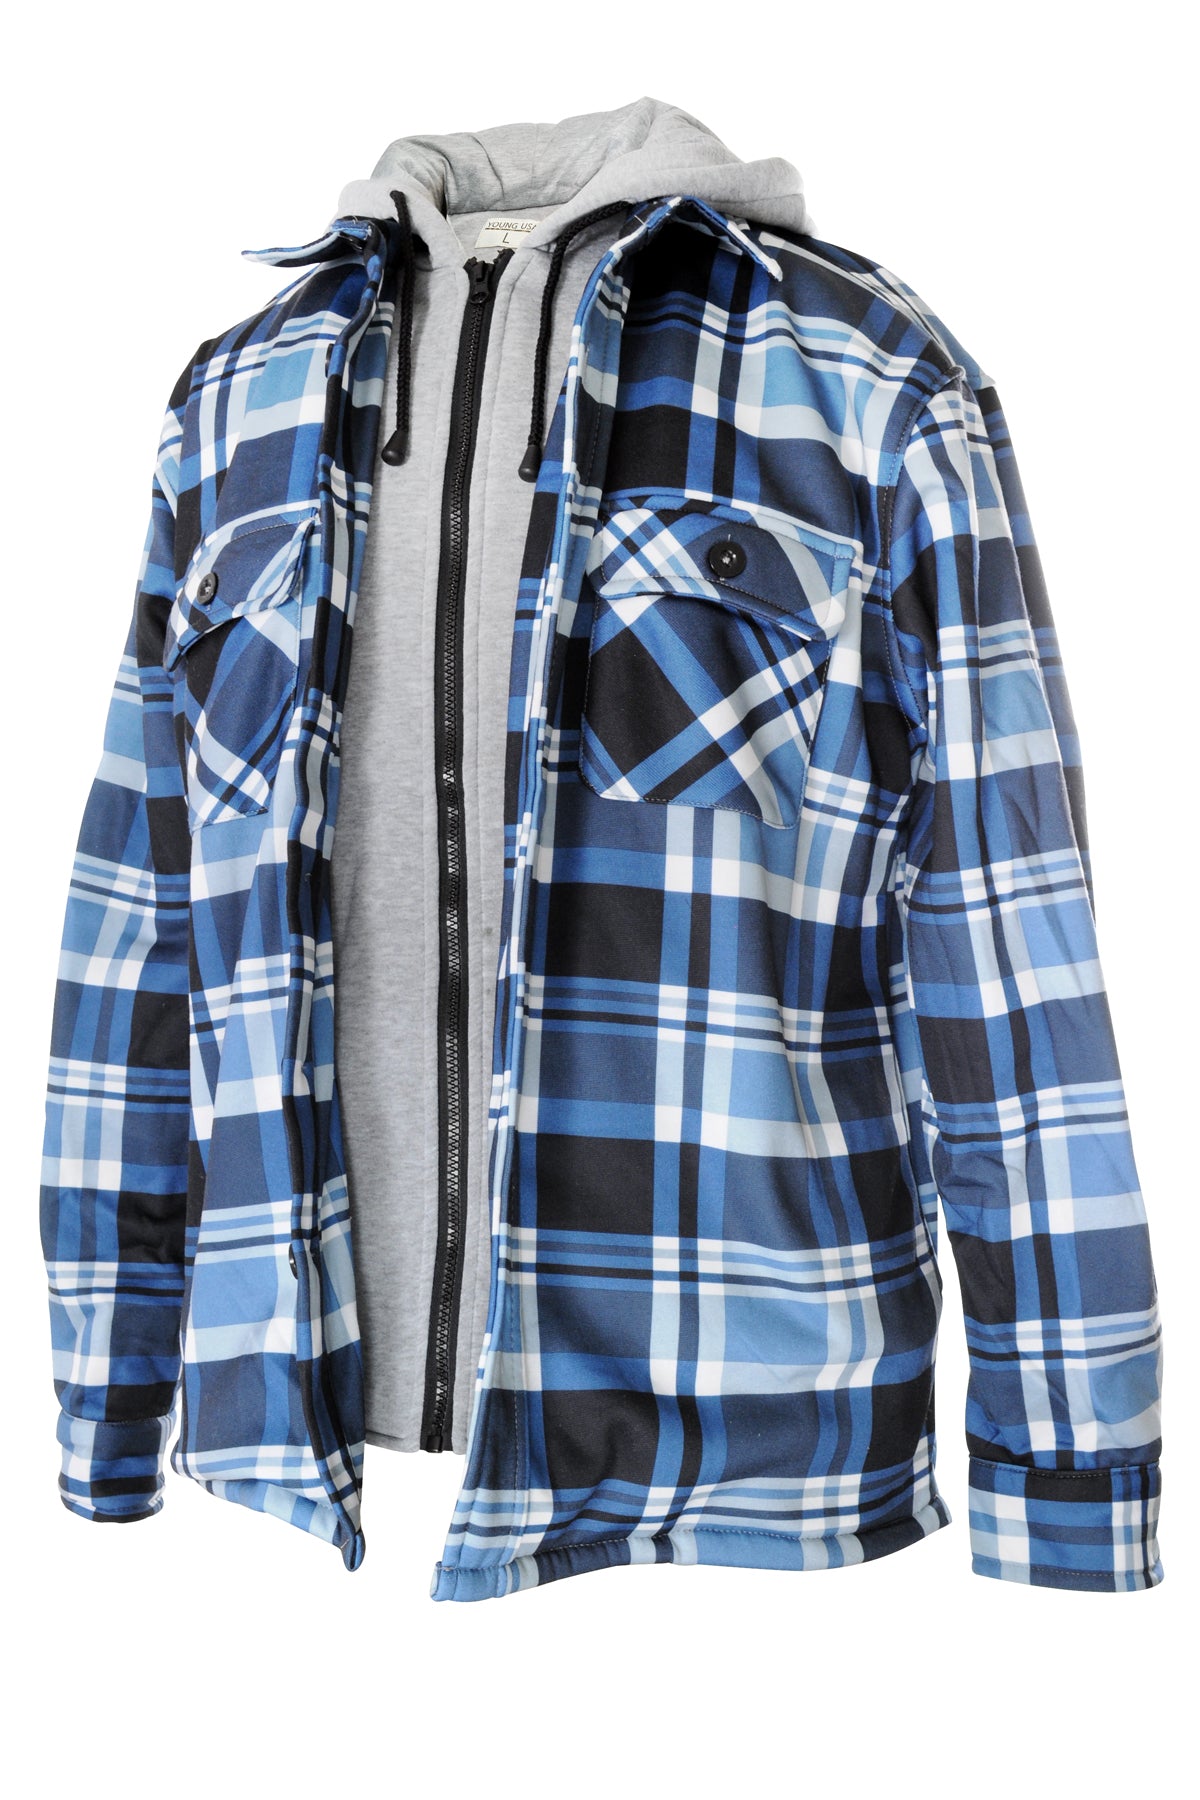 Young USA® Men's Zip Up Hooded Flannel Shirt Jacket